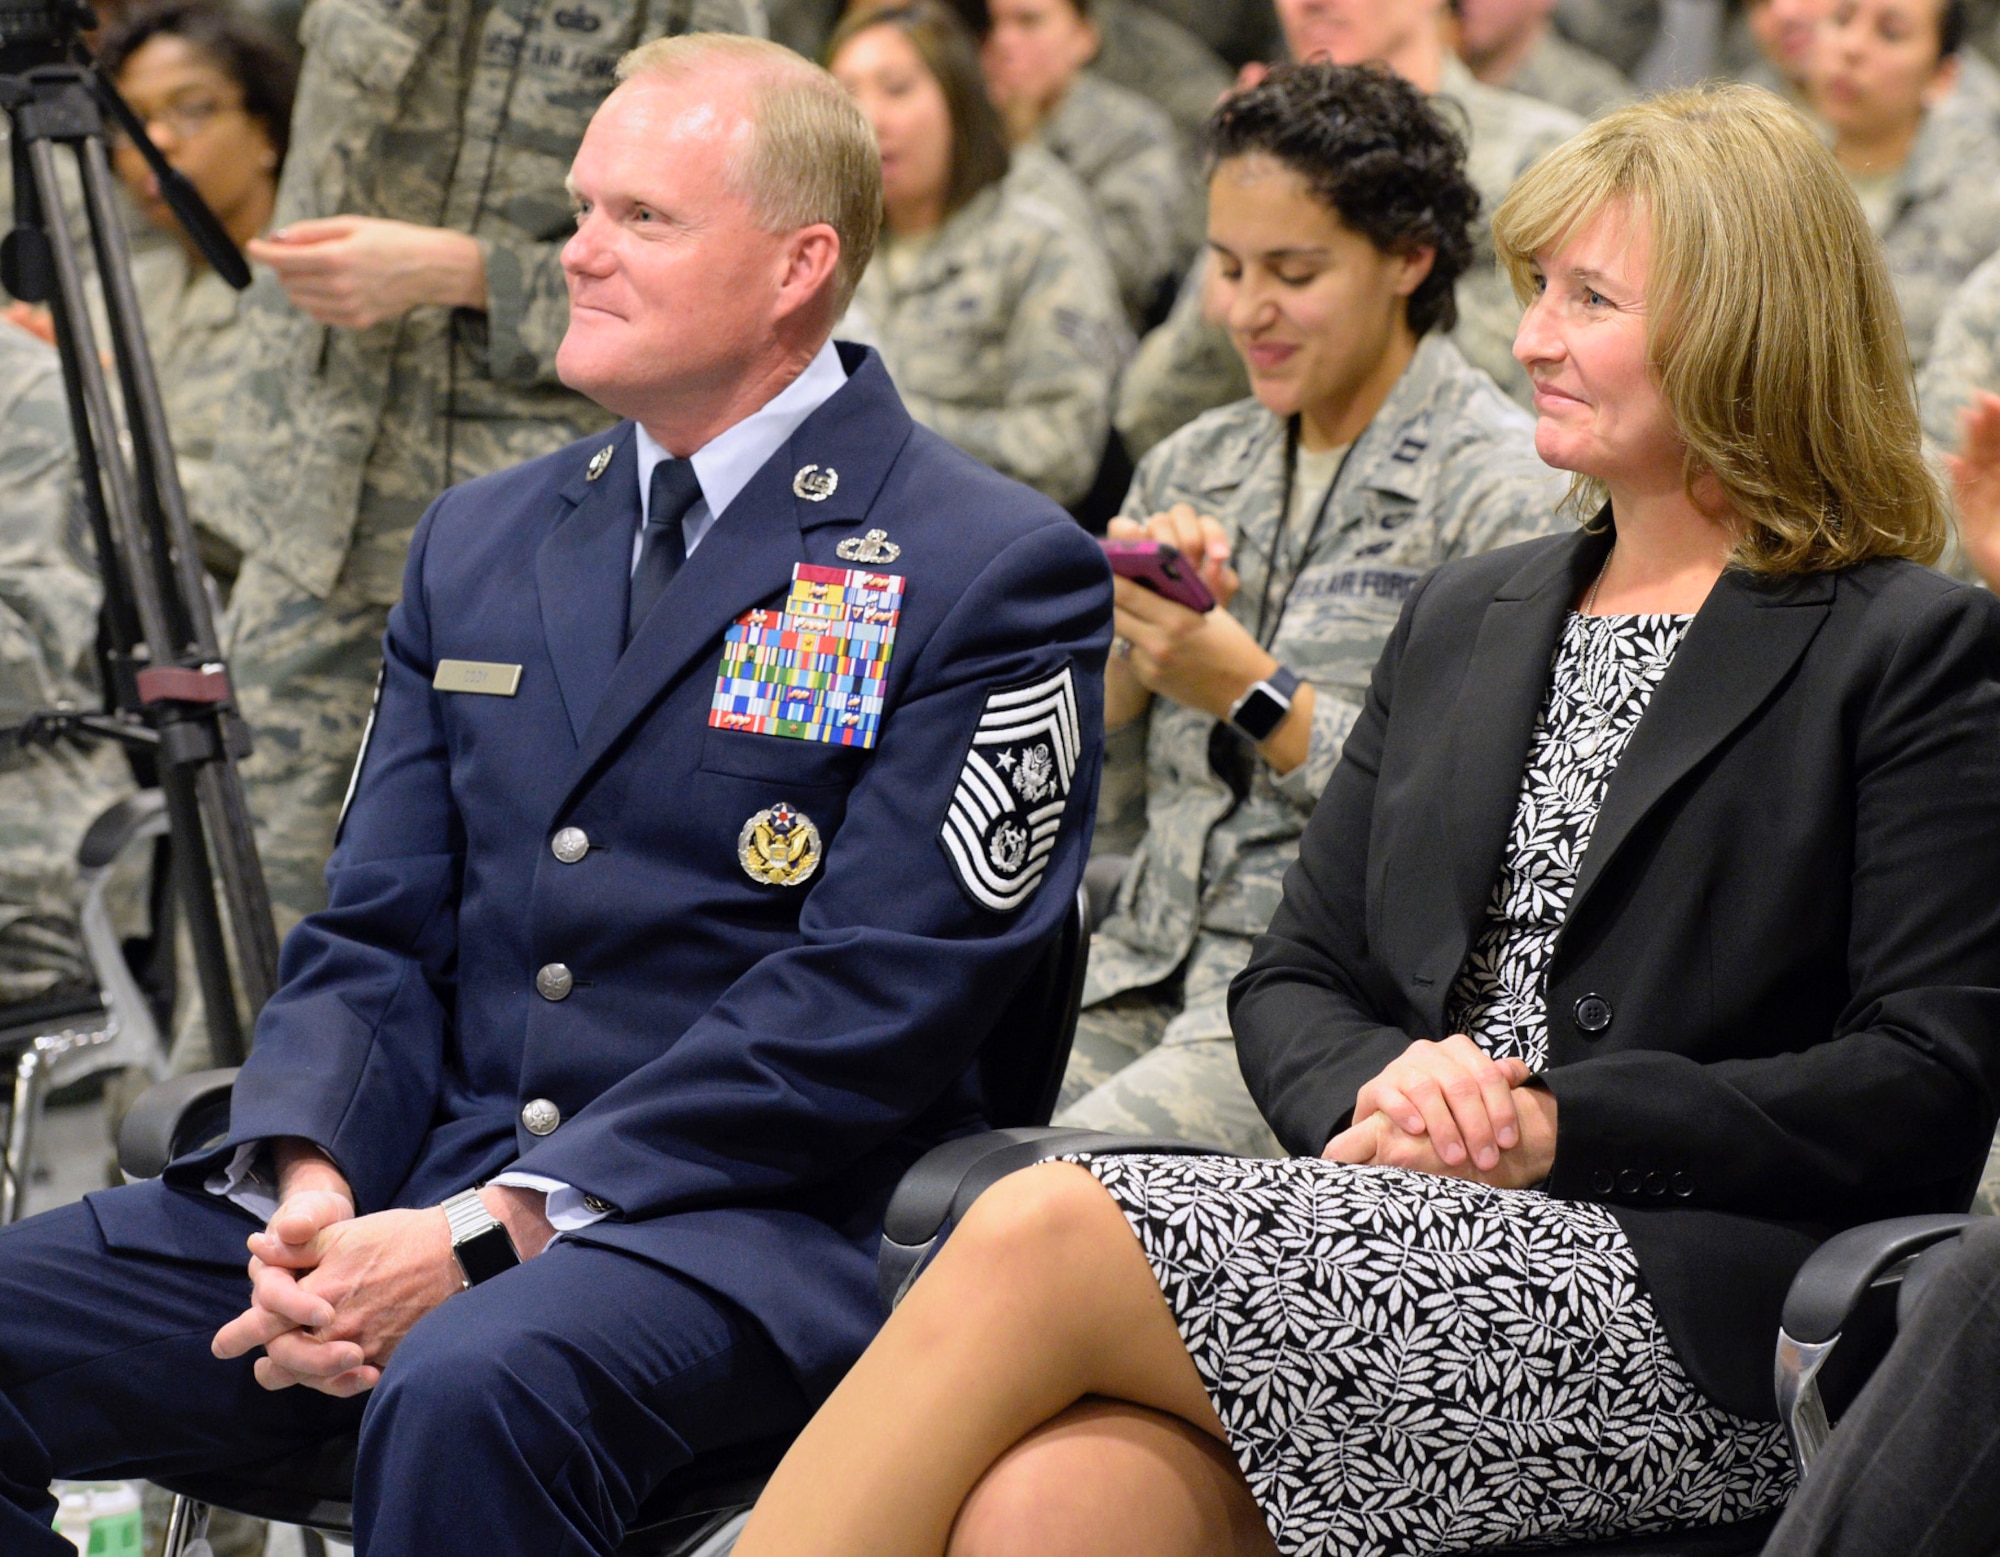 Chief Master Sgt. of the Air Force James A. Cody sits with wife, retired Chief Master Sgt. Athena Cody, after Air Force senior leaders announced Chief Master Sgt. Kaleth O. Wright  as the 18th CMSAF at the Pentagon Nov. 16, 2016. (U.S. Air Force photo/Staff Sgt. Alyssa C. Gibson)